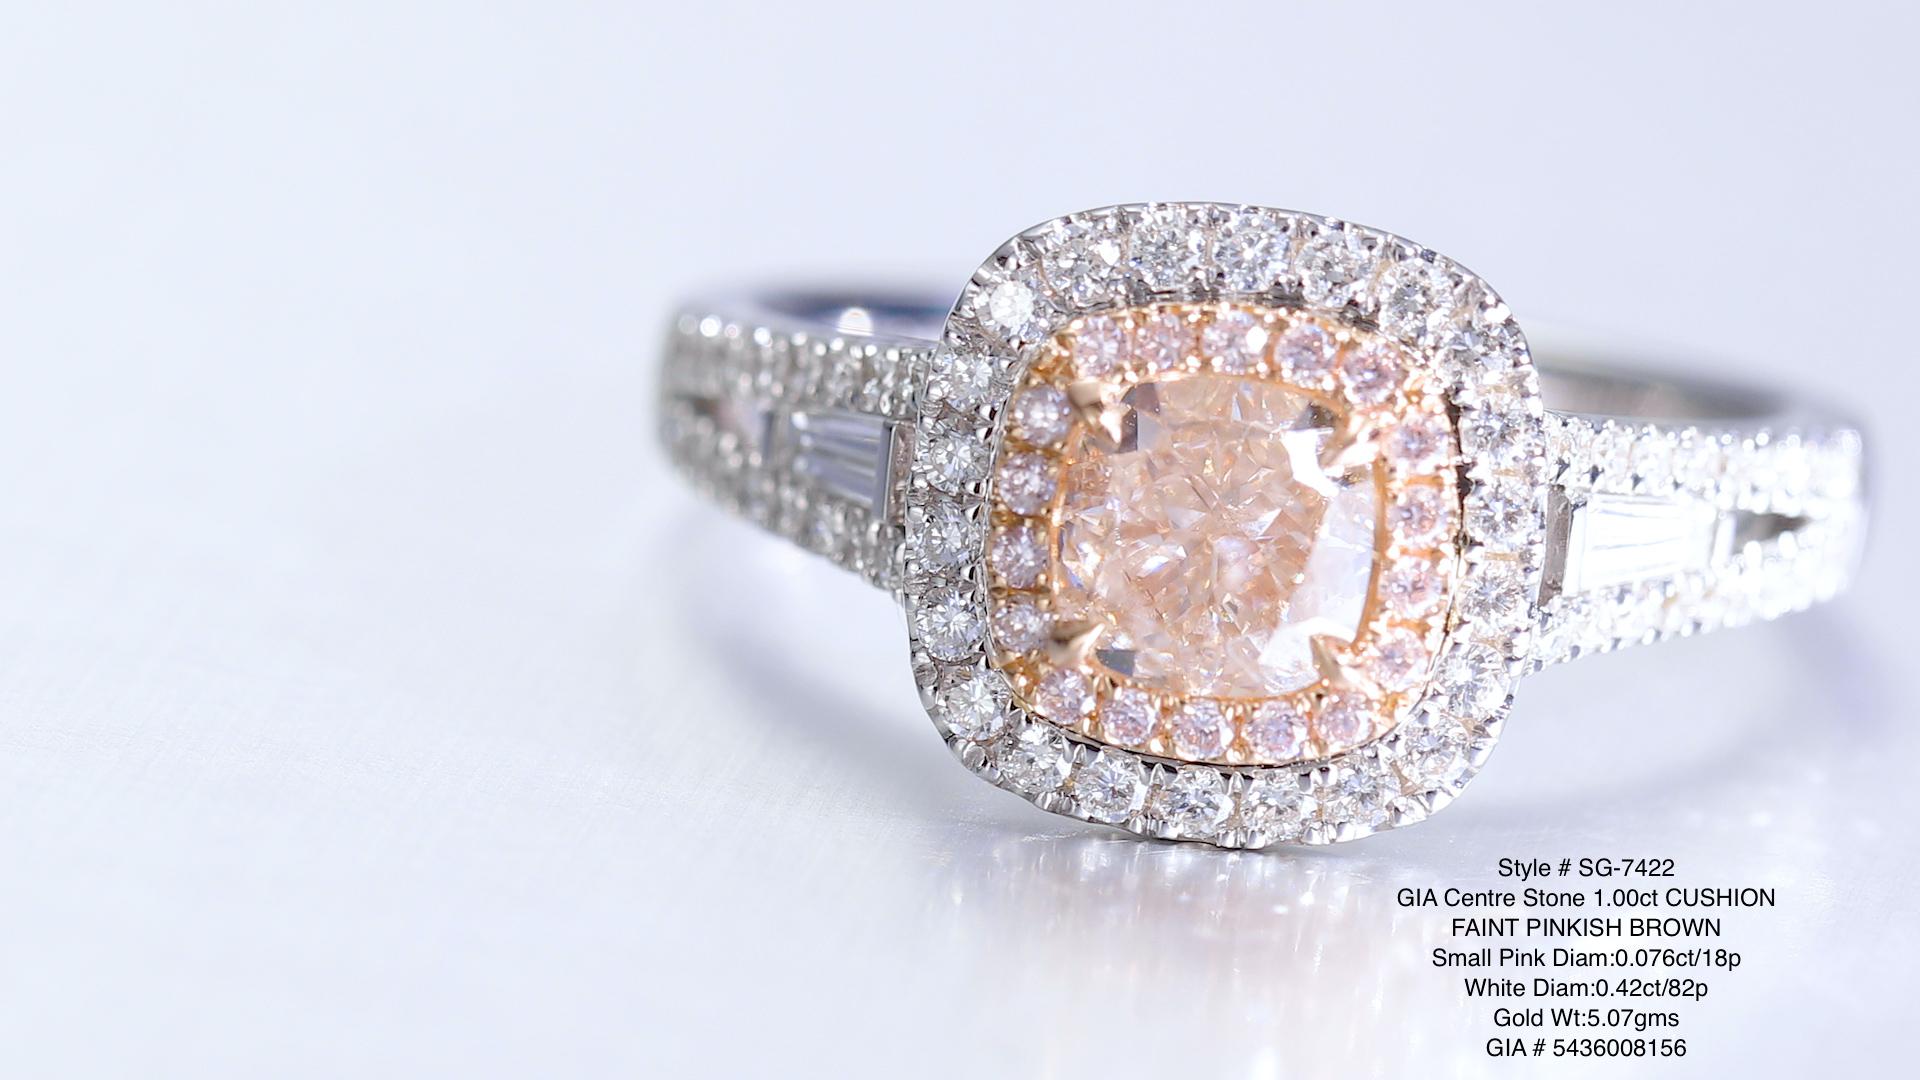 the GIA Certified 1.00ct Cushion Natural Fancy Faint Pinkish Brown Diamond Ring. This exquisite ring is crafted from lustrous 18kt gold, providing a luxurious backdrop for its remarkable centerpiece.

At the heart of this enchanting ring lies a